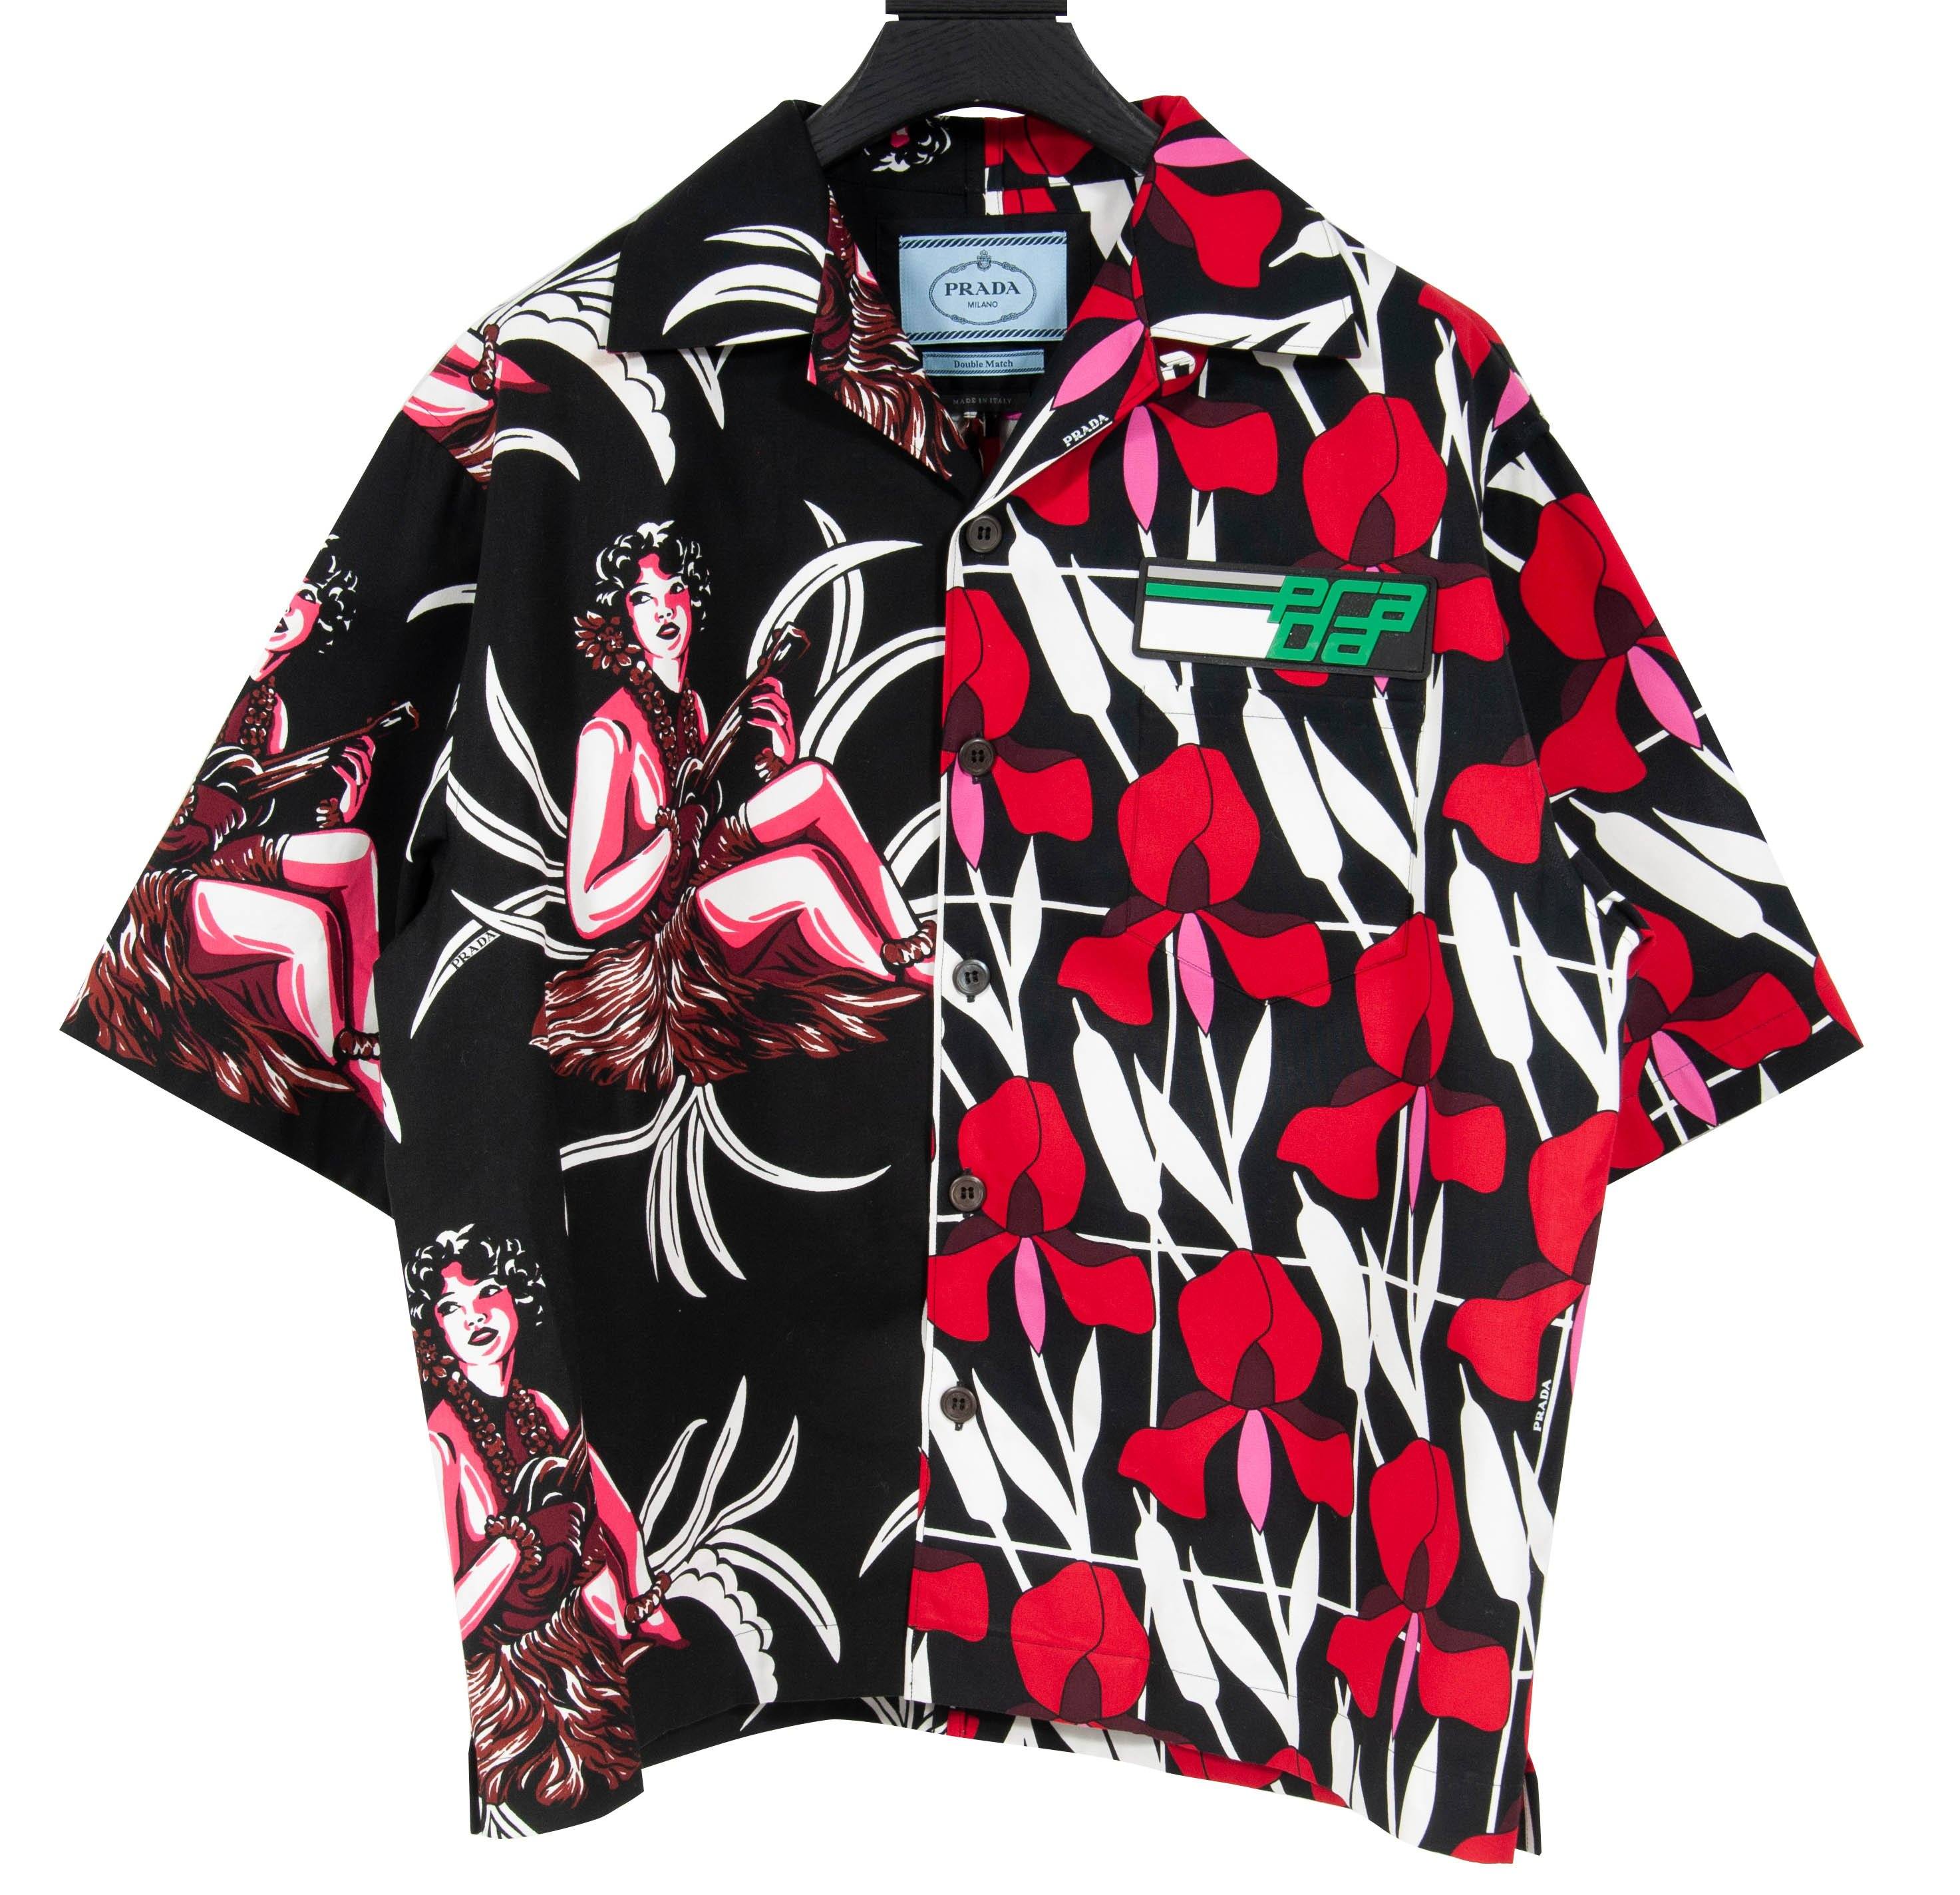 Prada's Summer 20 Double Match Bowling Shirts — Official Roses